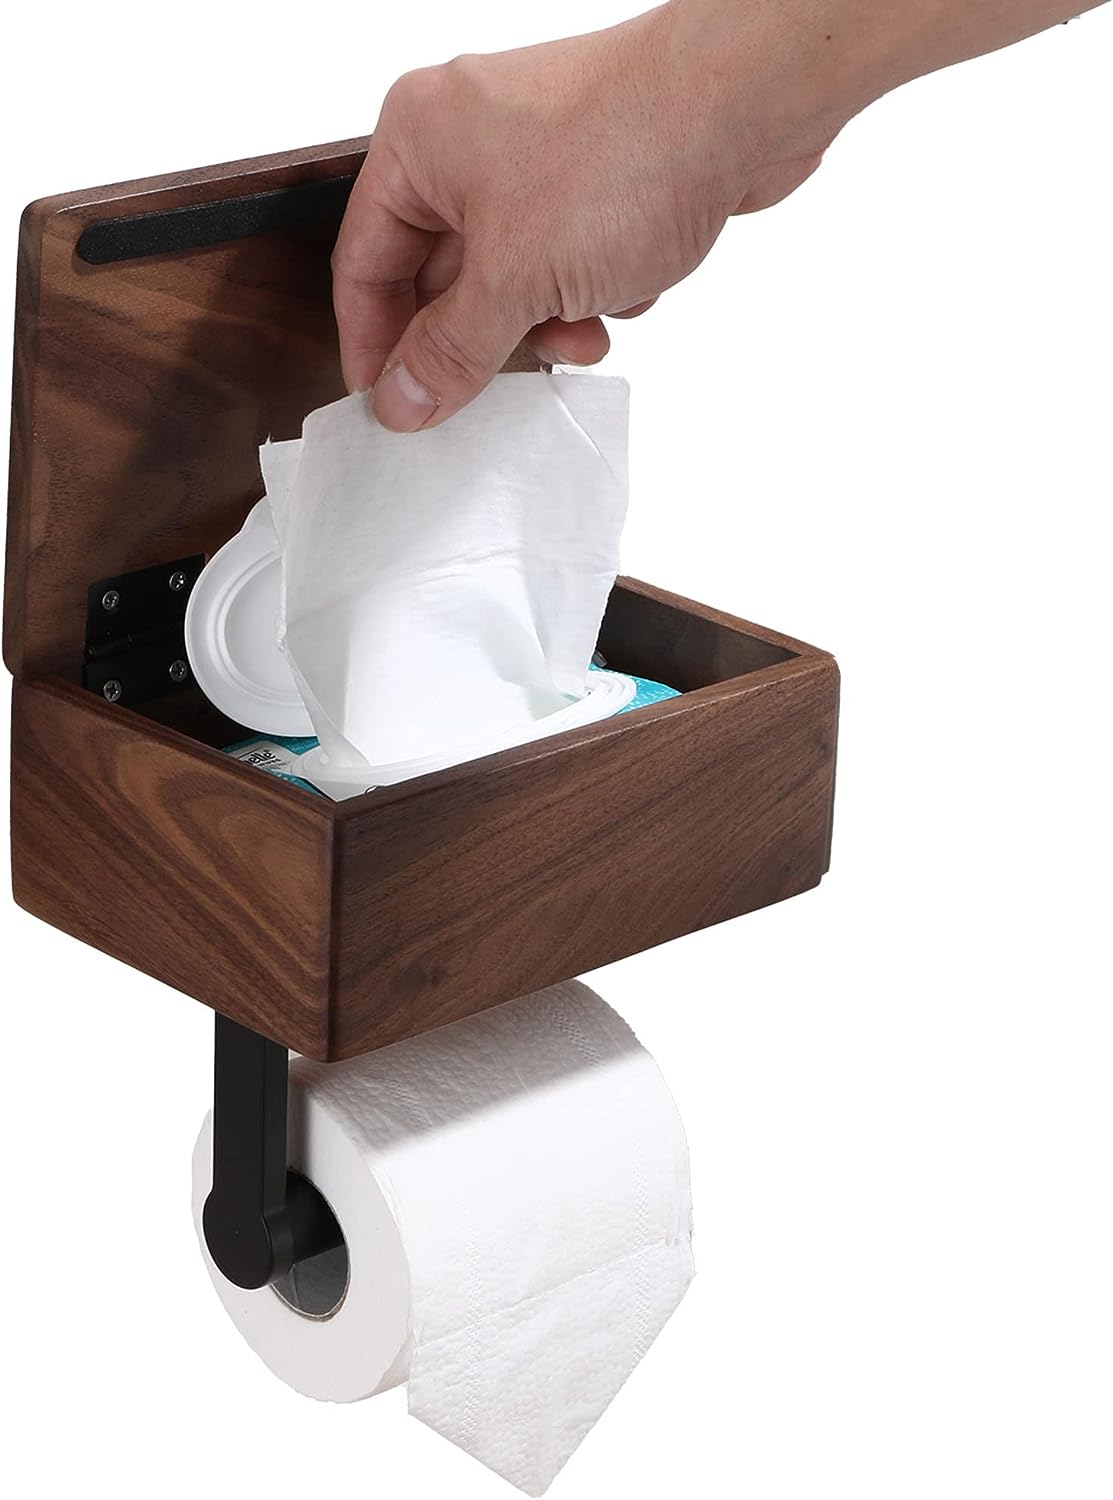 https://bigbigmart.com/wp-content/uploads/2023/10/Day-Moon-Designs-Toilet-Paper-Holder-with-Shelf-Flushable-Wipes-Dispenser-Storage-Fits-Any-Bathroom-Keep-Your-Wet-Wipes-Hidden-Wooden-Wall-Mount-Bathroom-Organizer-Small-Dark-Wood.jpg